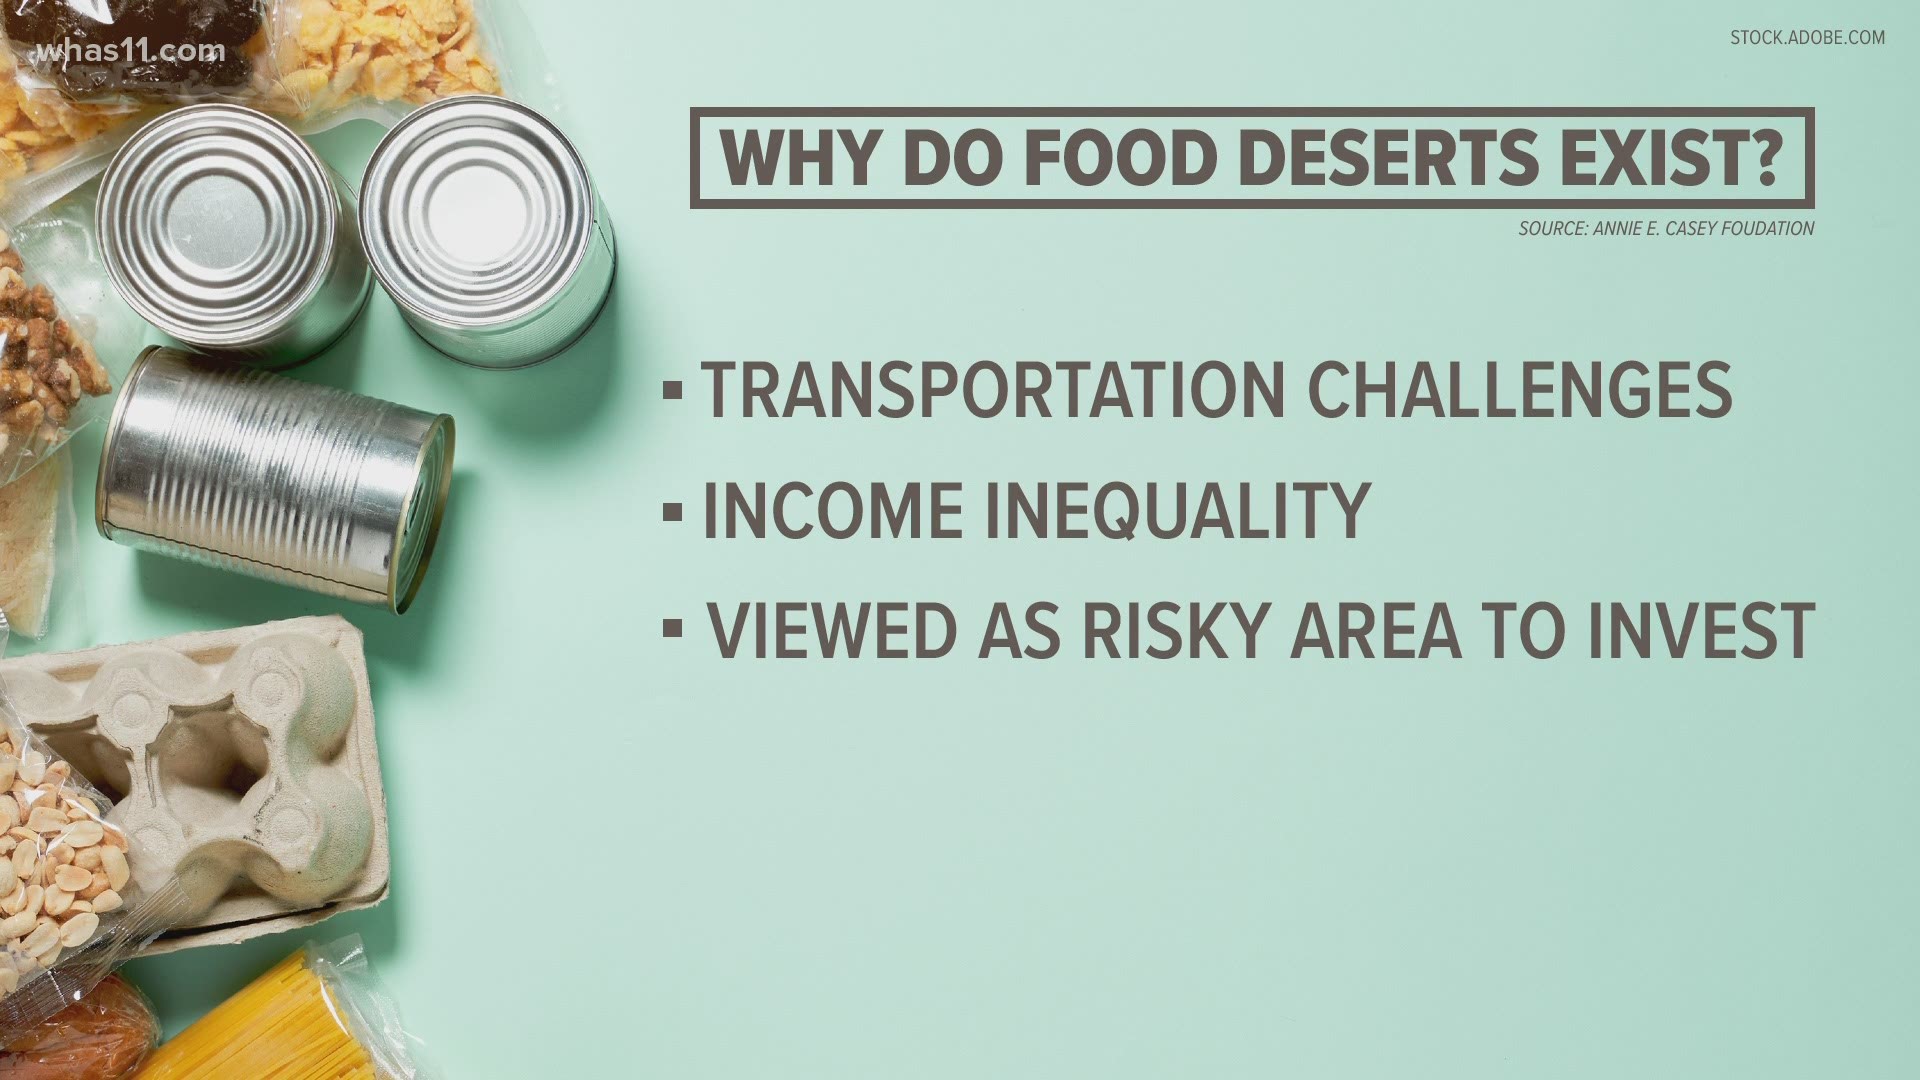 The West Louisville community is hoping for a local grocery store to help combat the food desert issue in their area. Here's how food deserts happen.